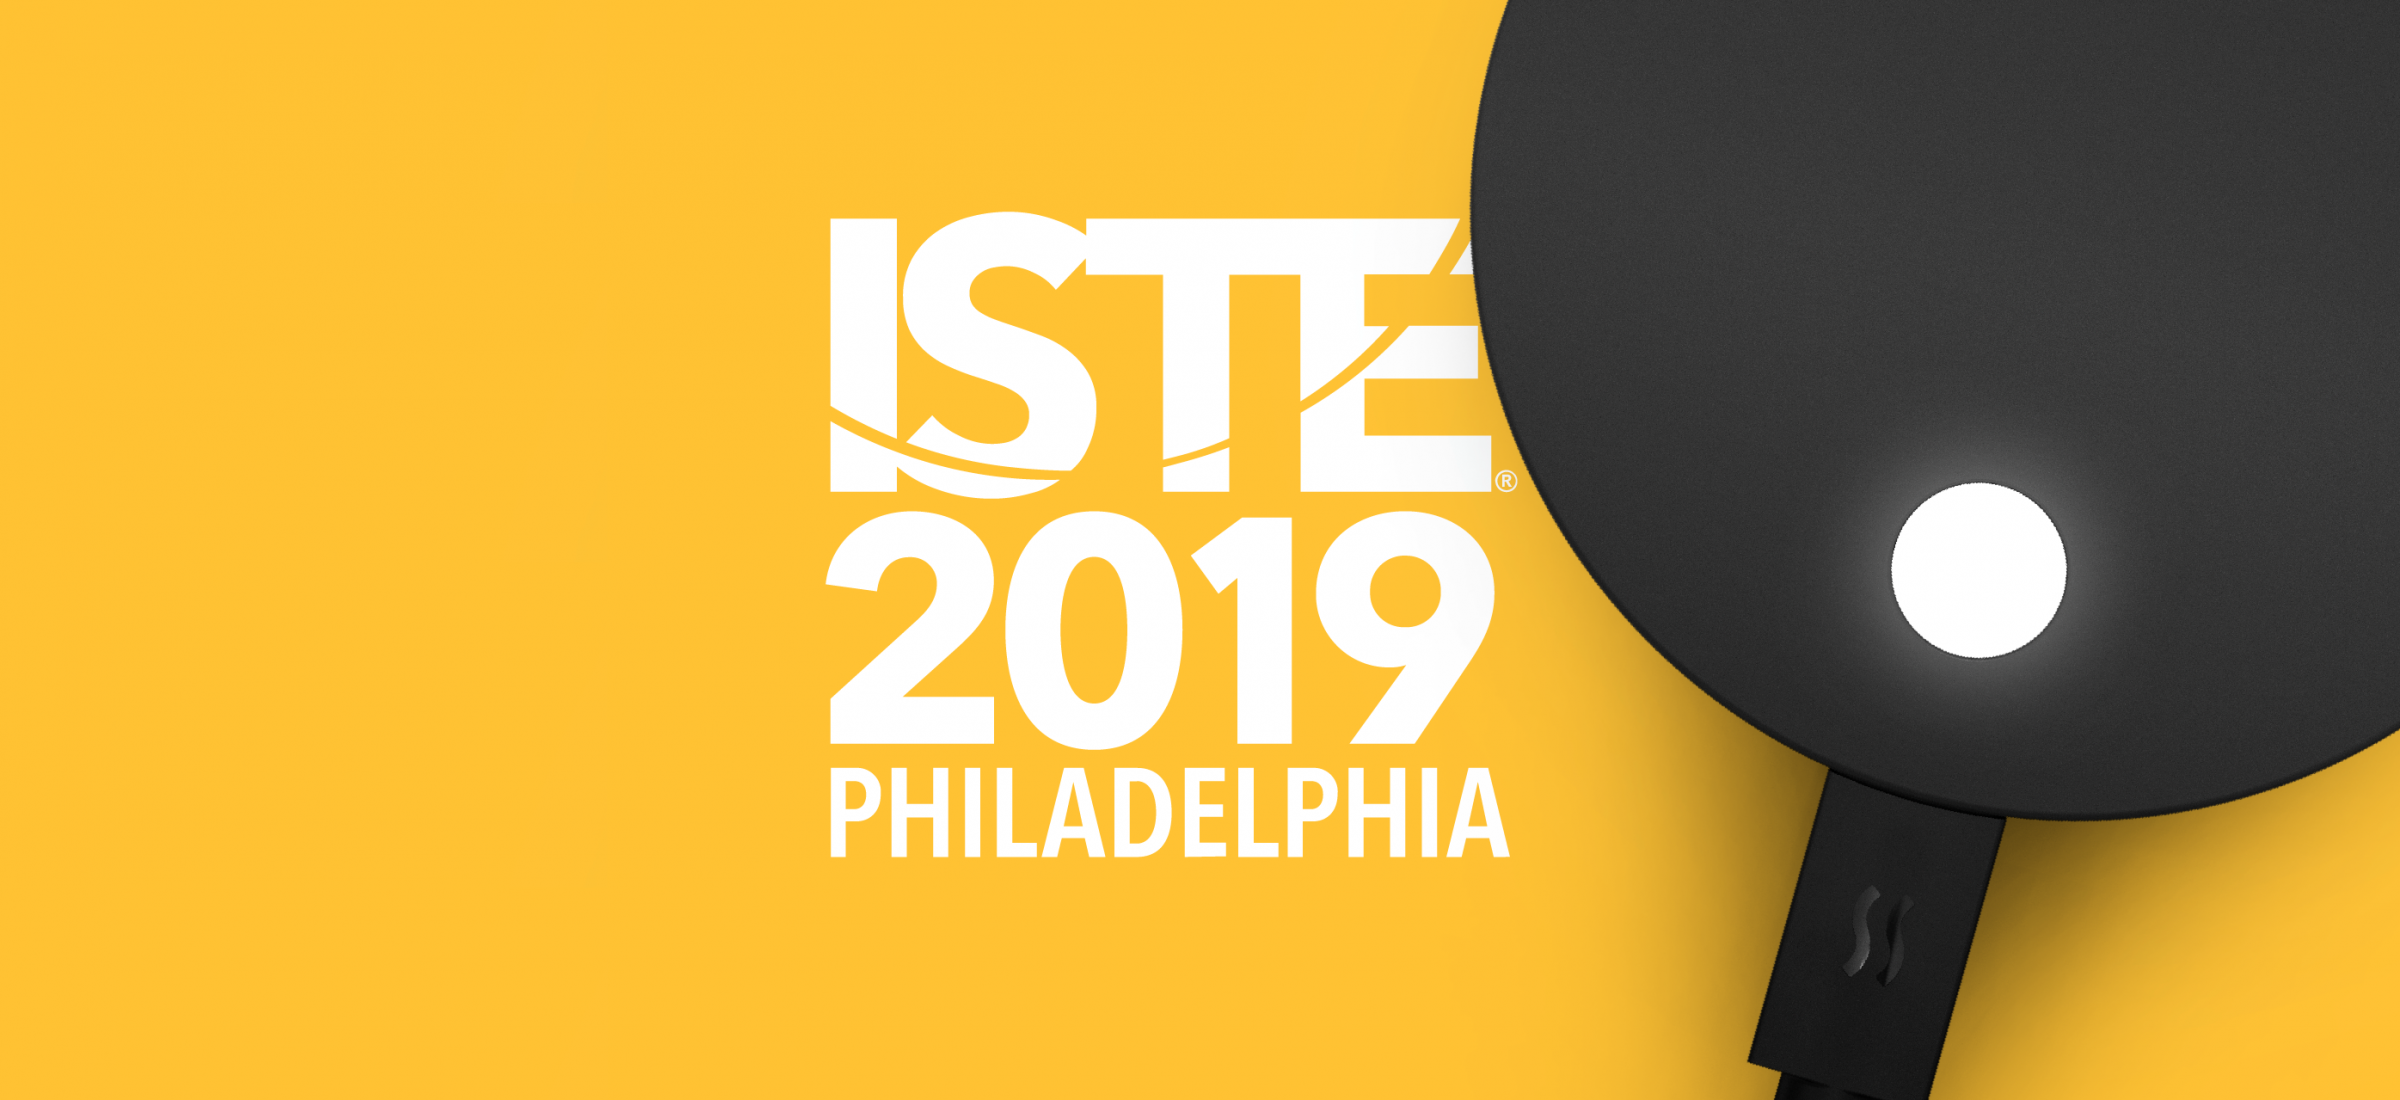 Airtame is heading to ISTE 2019